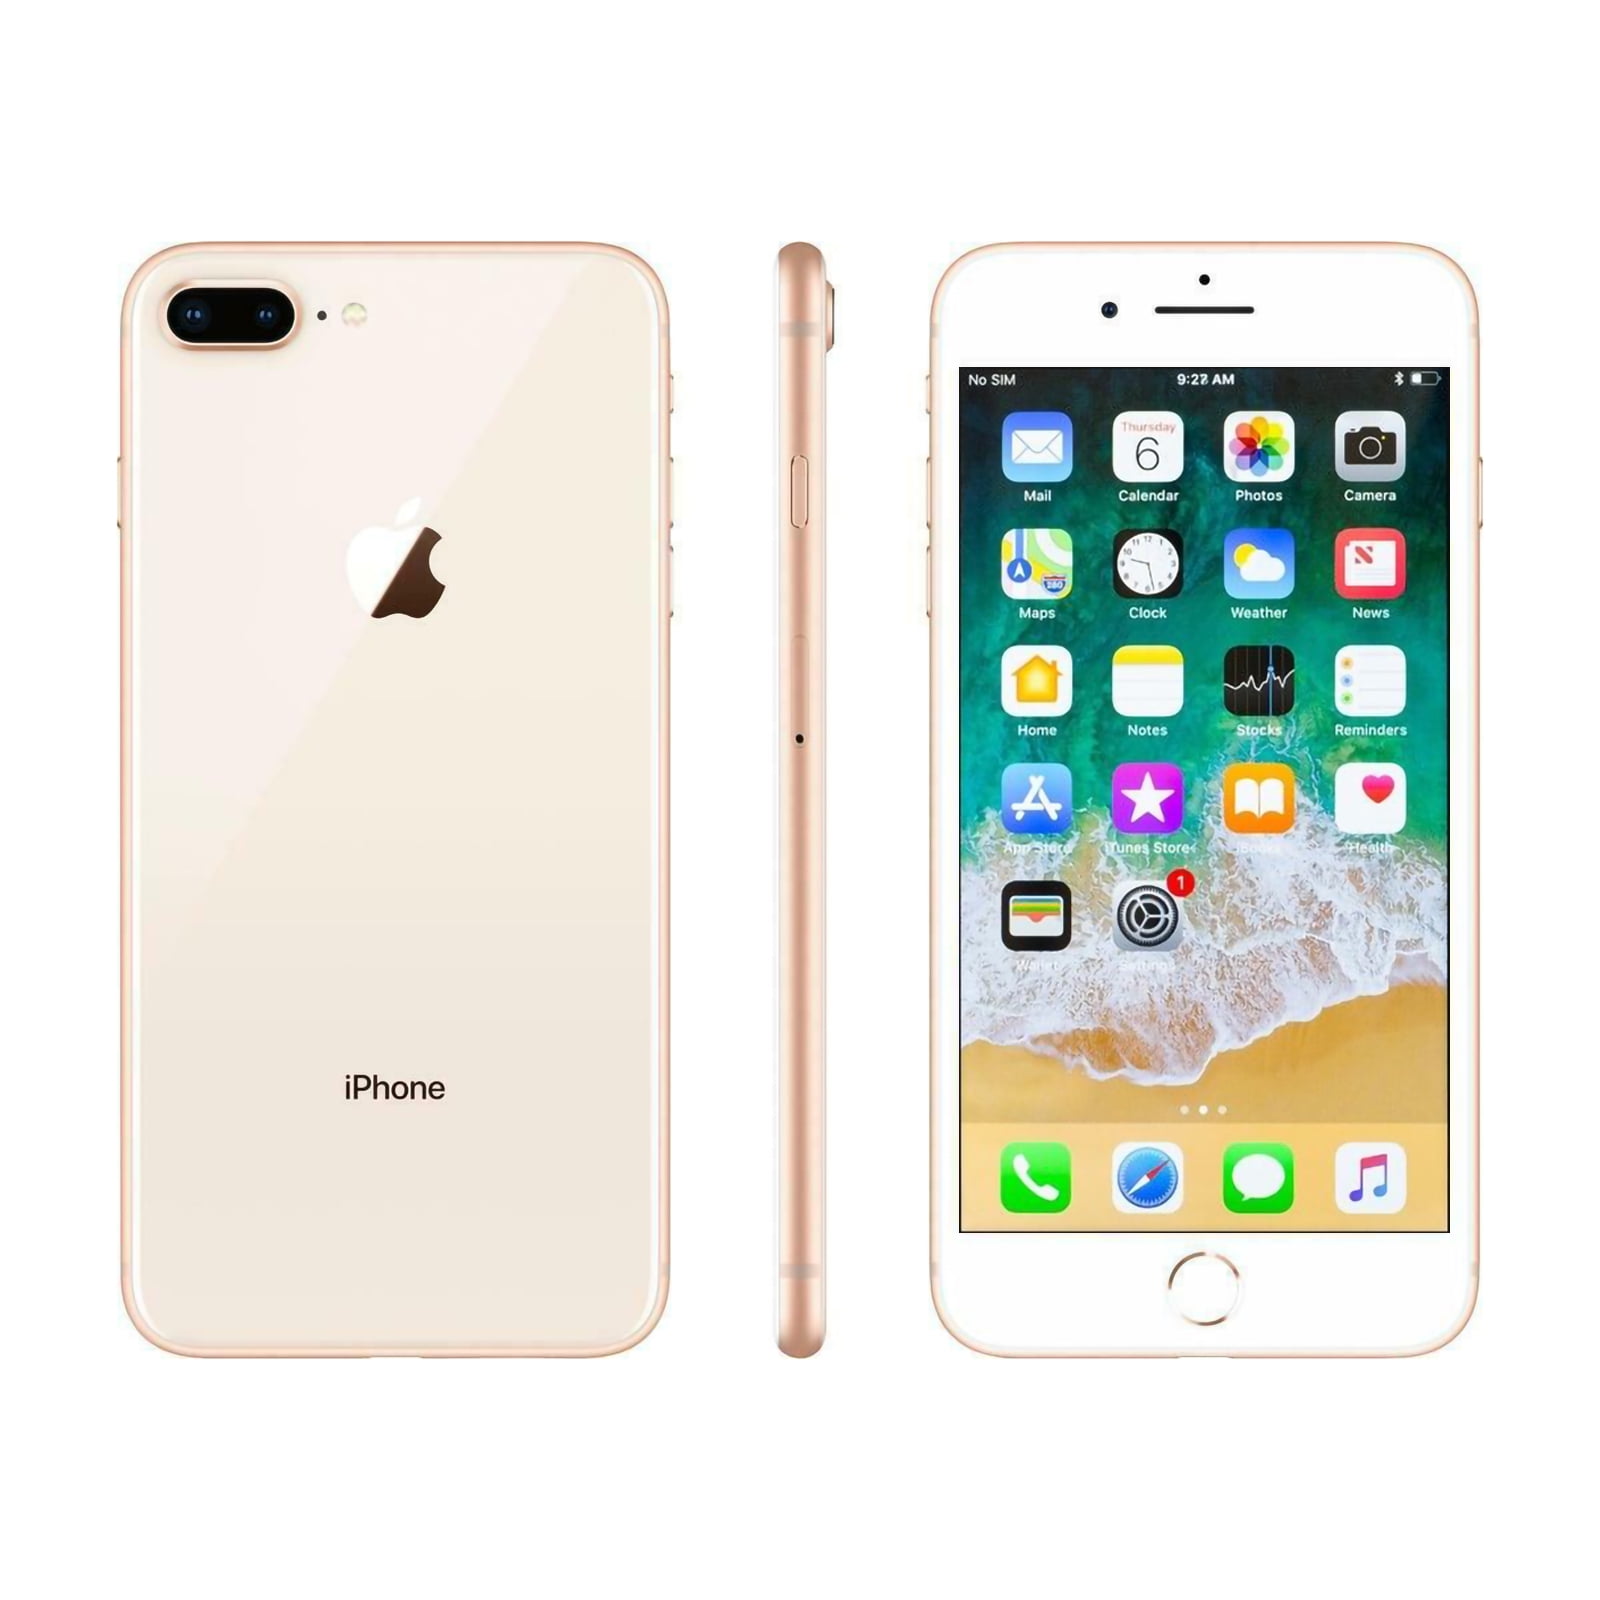 Apple iPhone 8 Plus 64GB Gold GSM Unlocked (AT&T + T-Mobile 